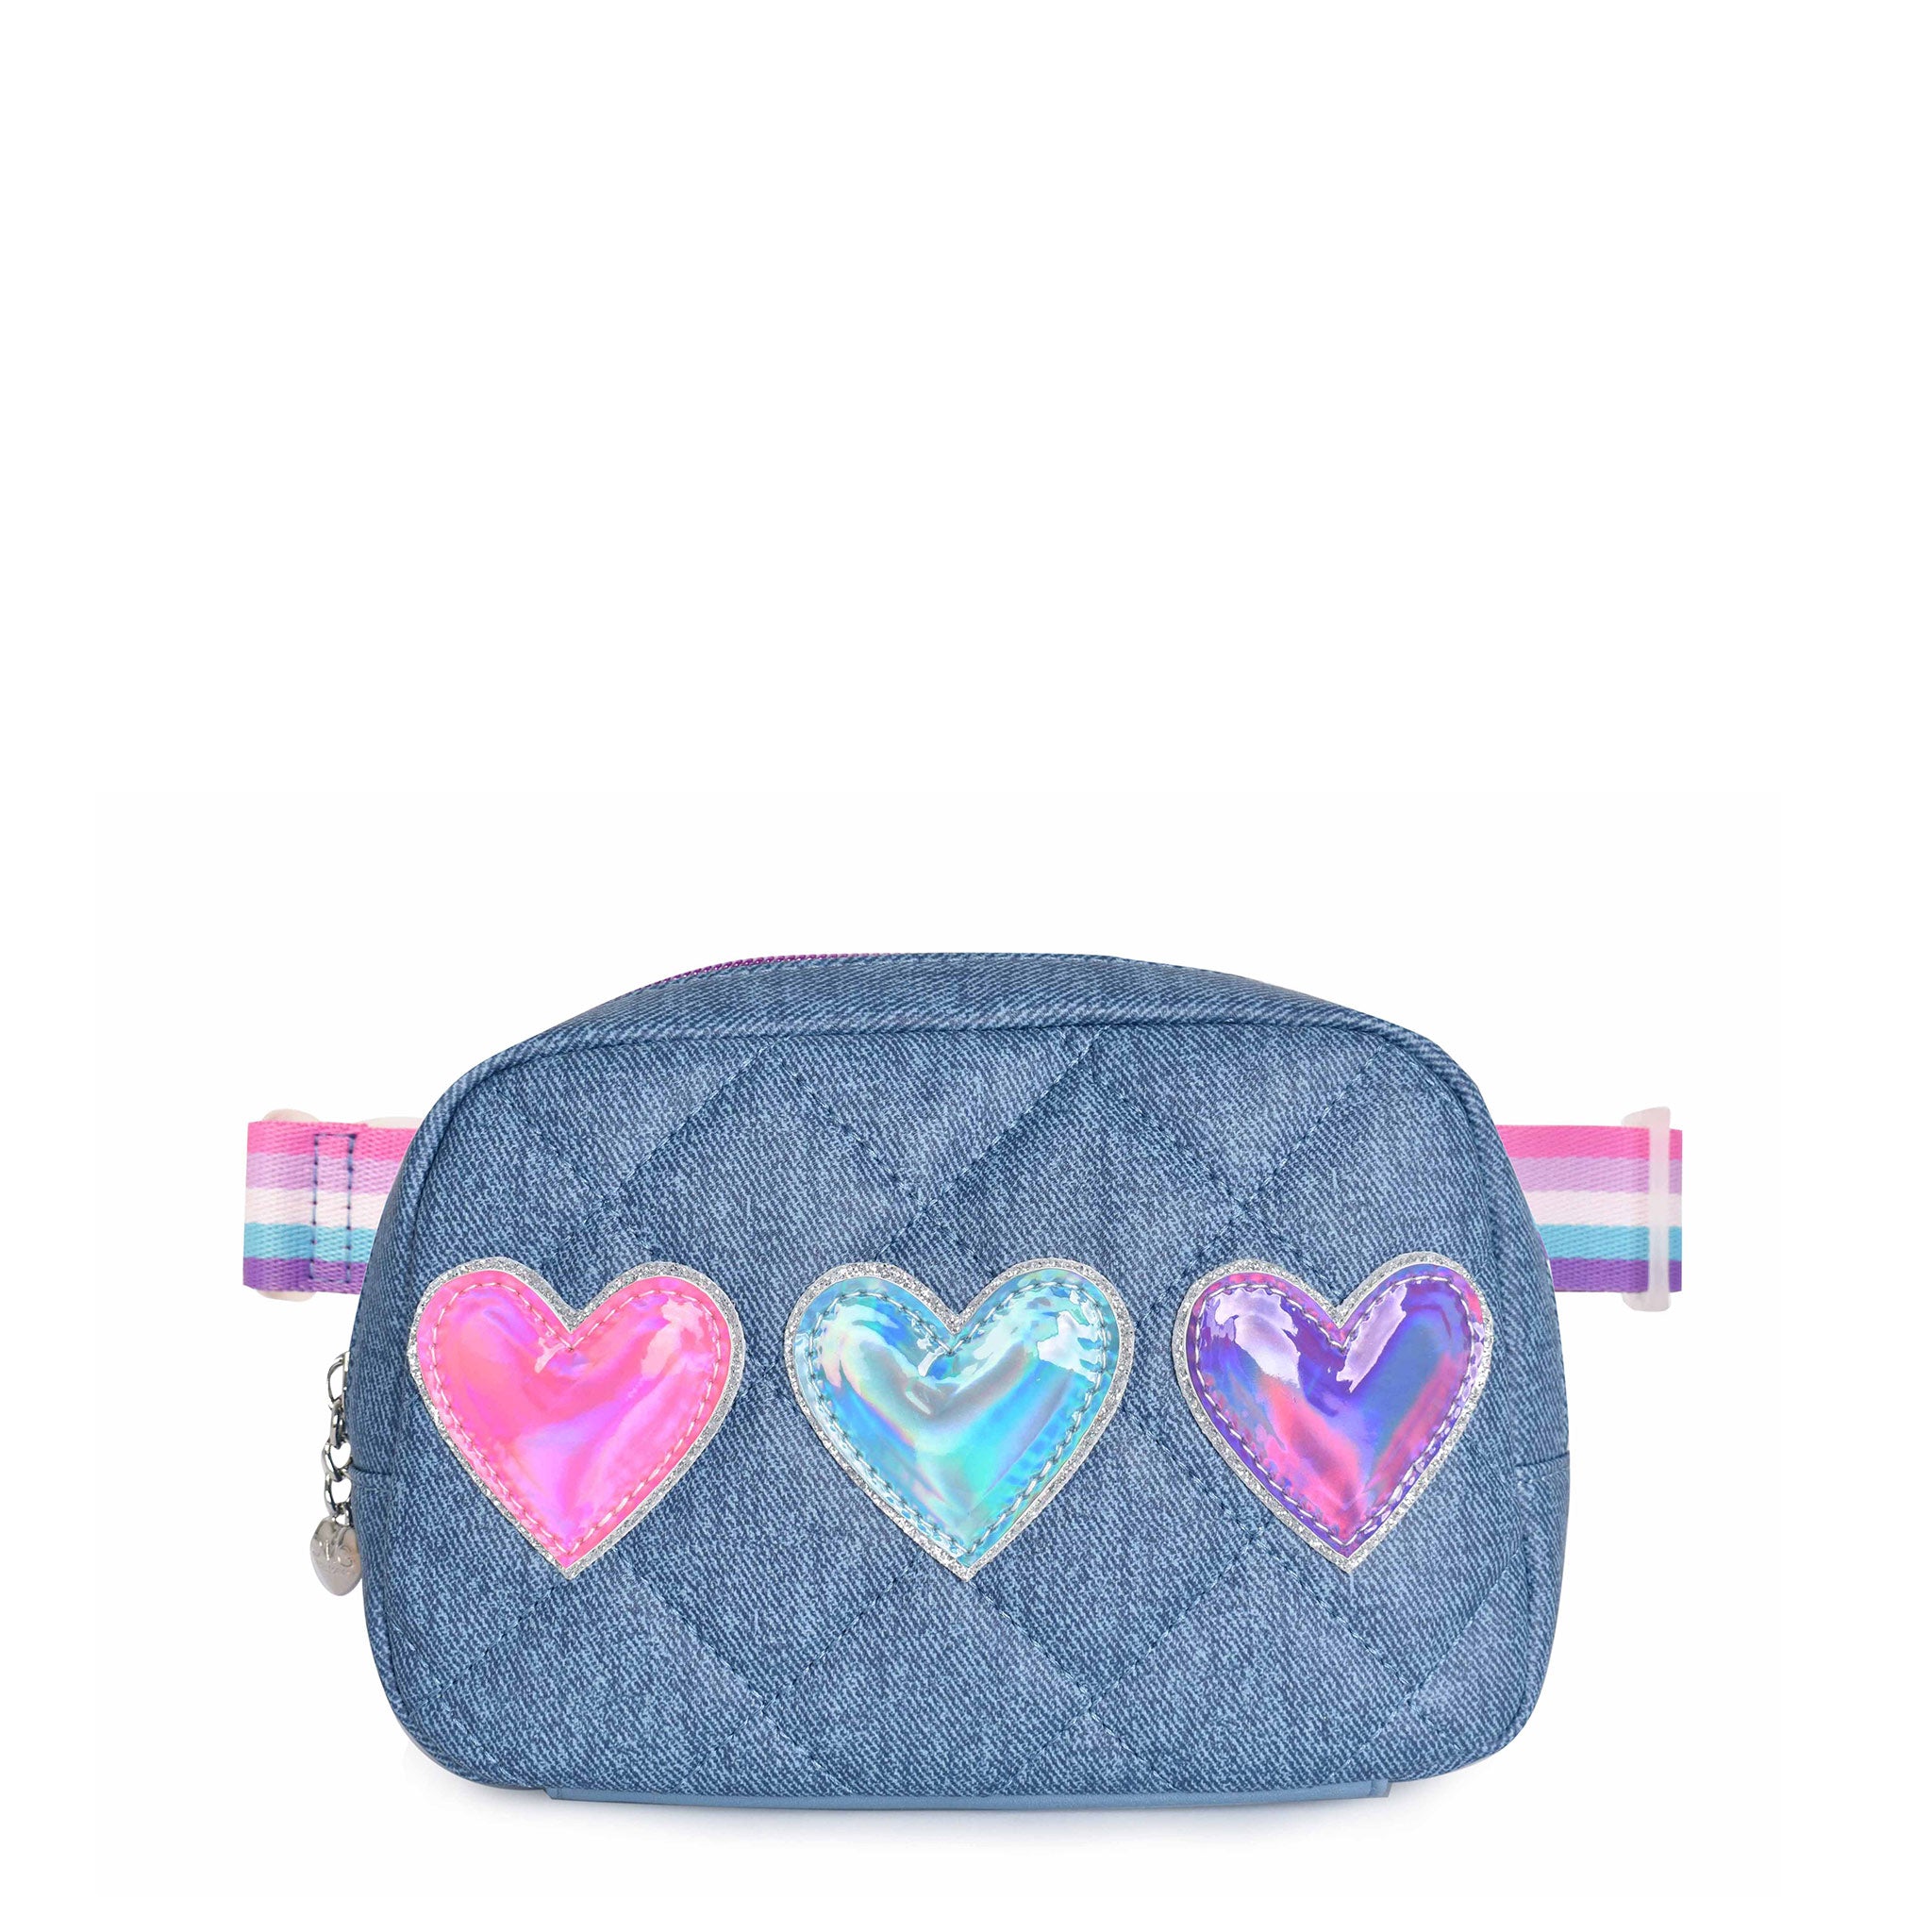 Front view of a denim quilted fanny pack with three metallic heart appliques